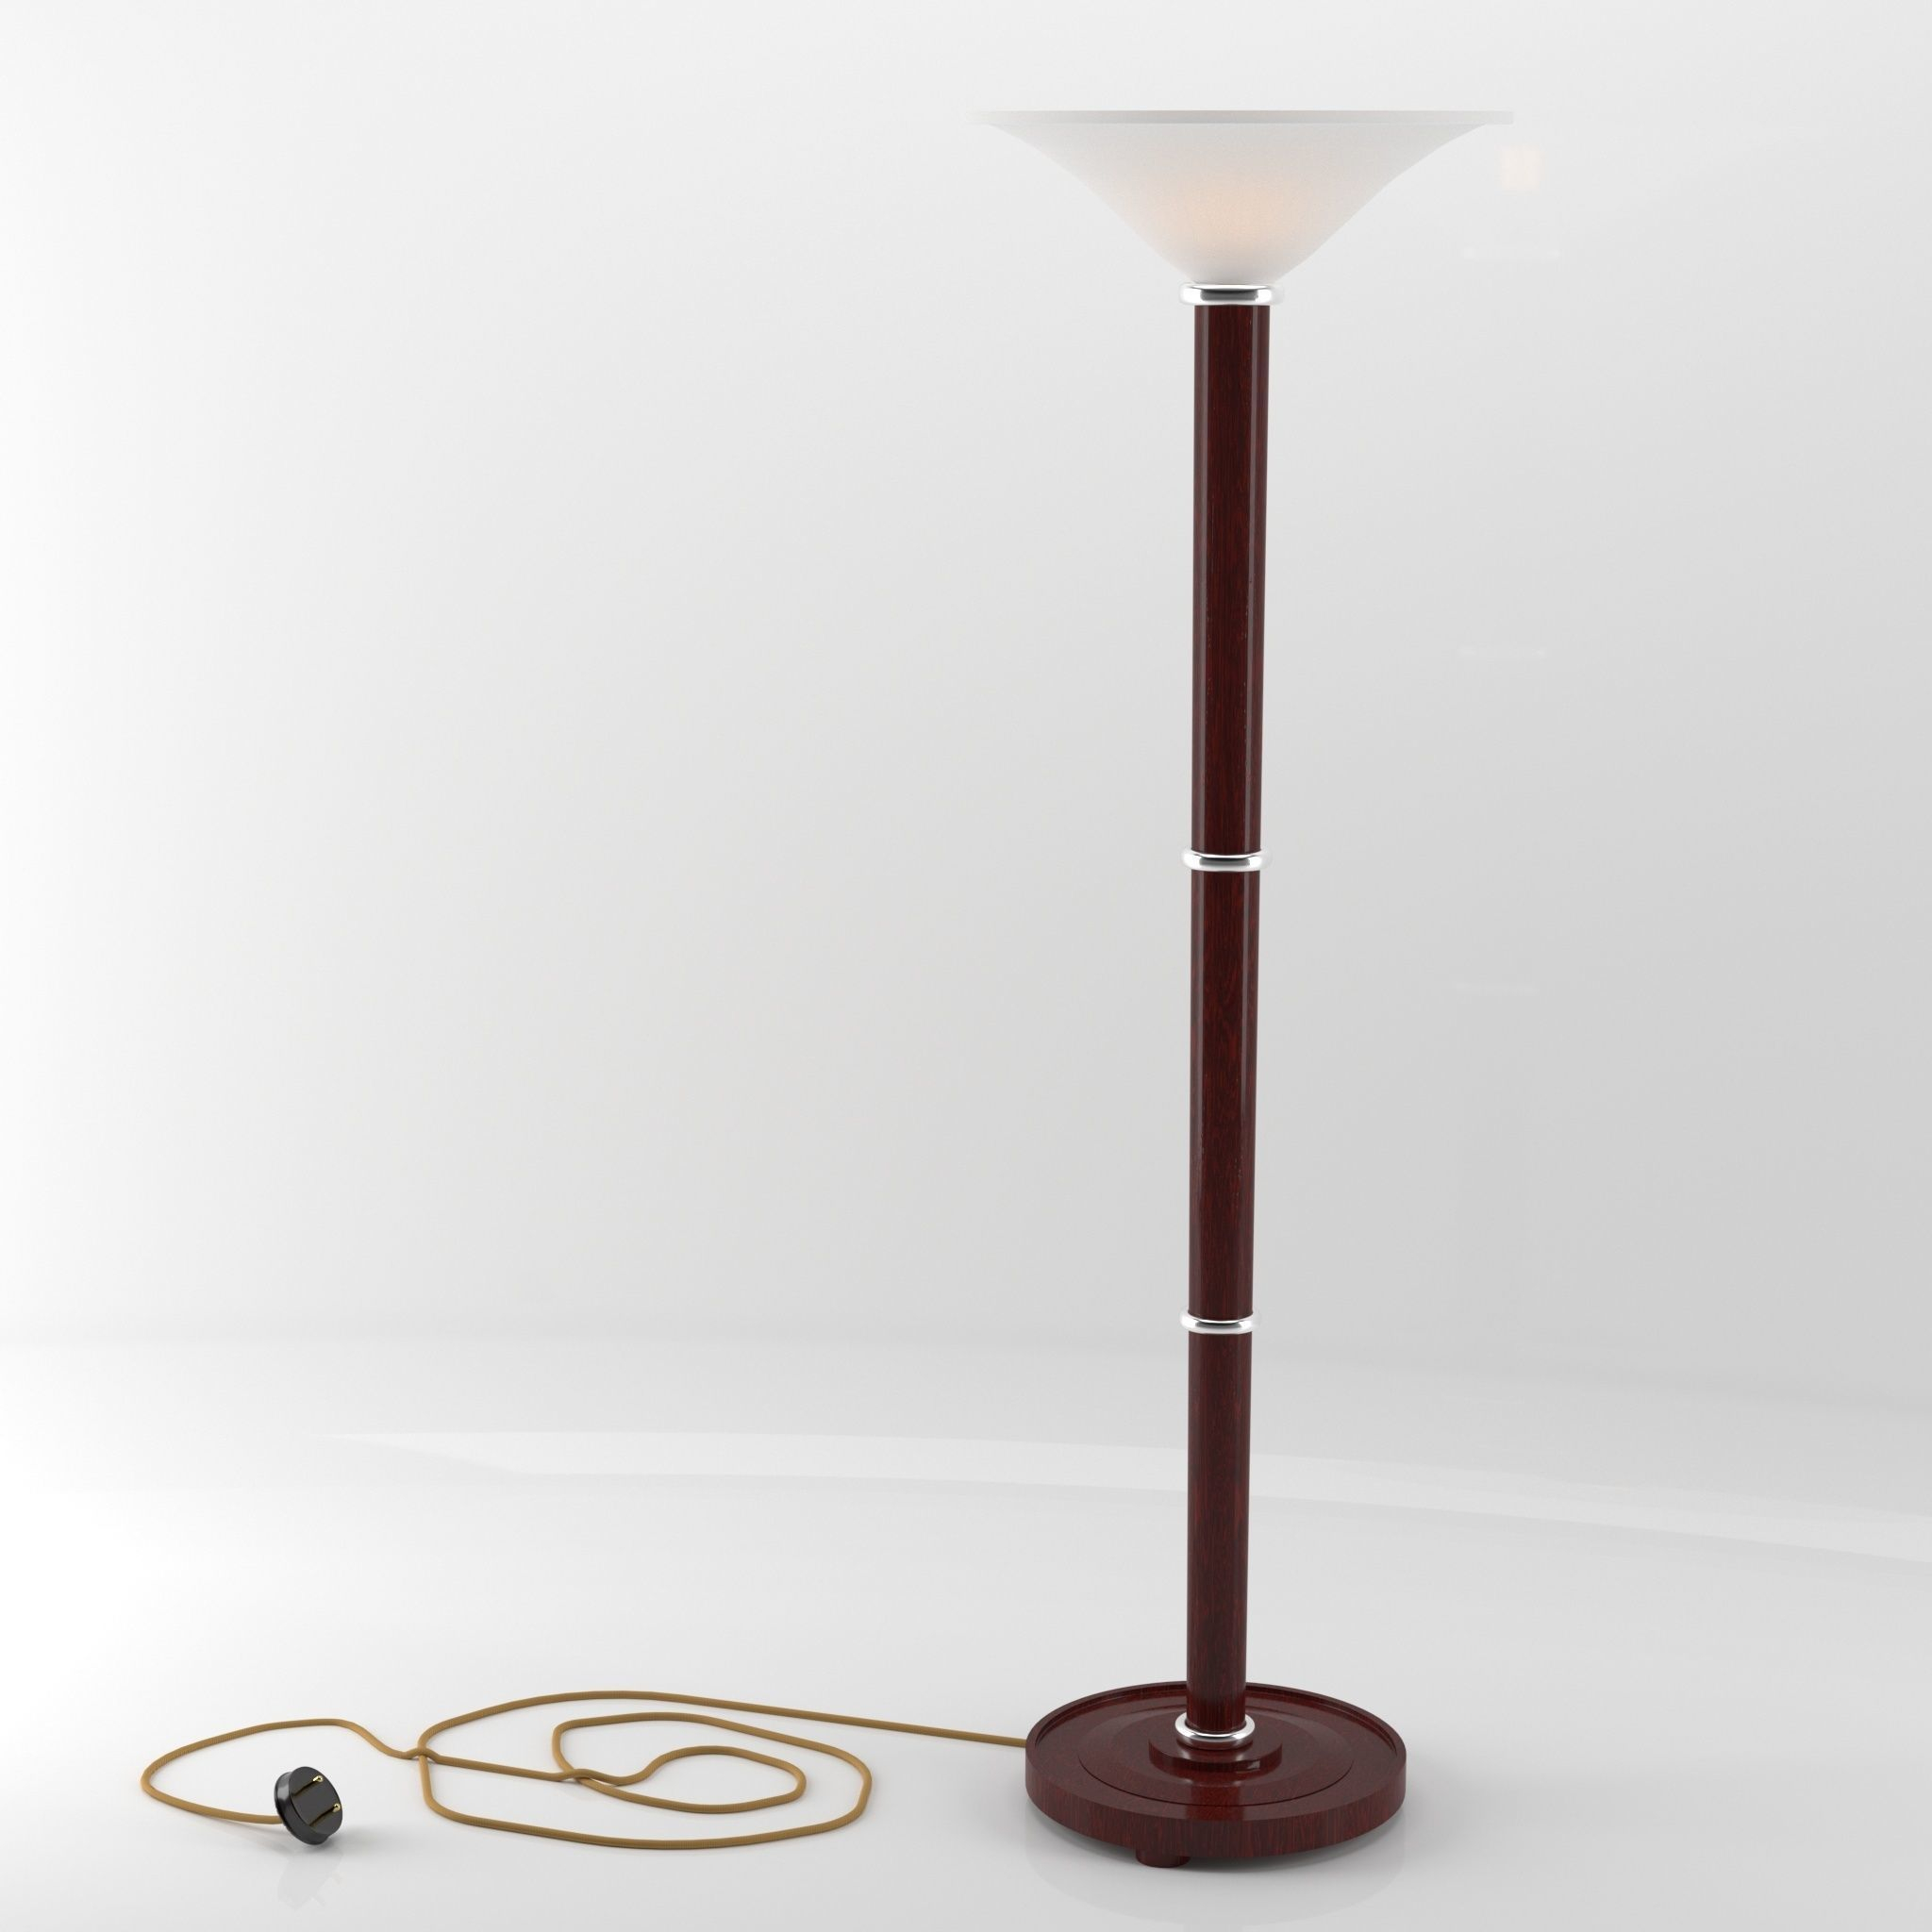 French Art Deco Floor Lamp 3d Model for size 2048 X 2048